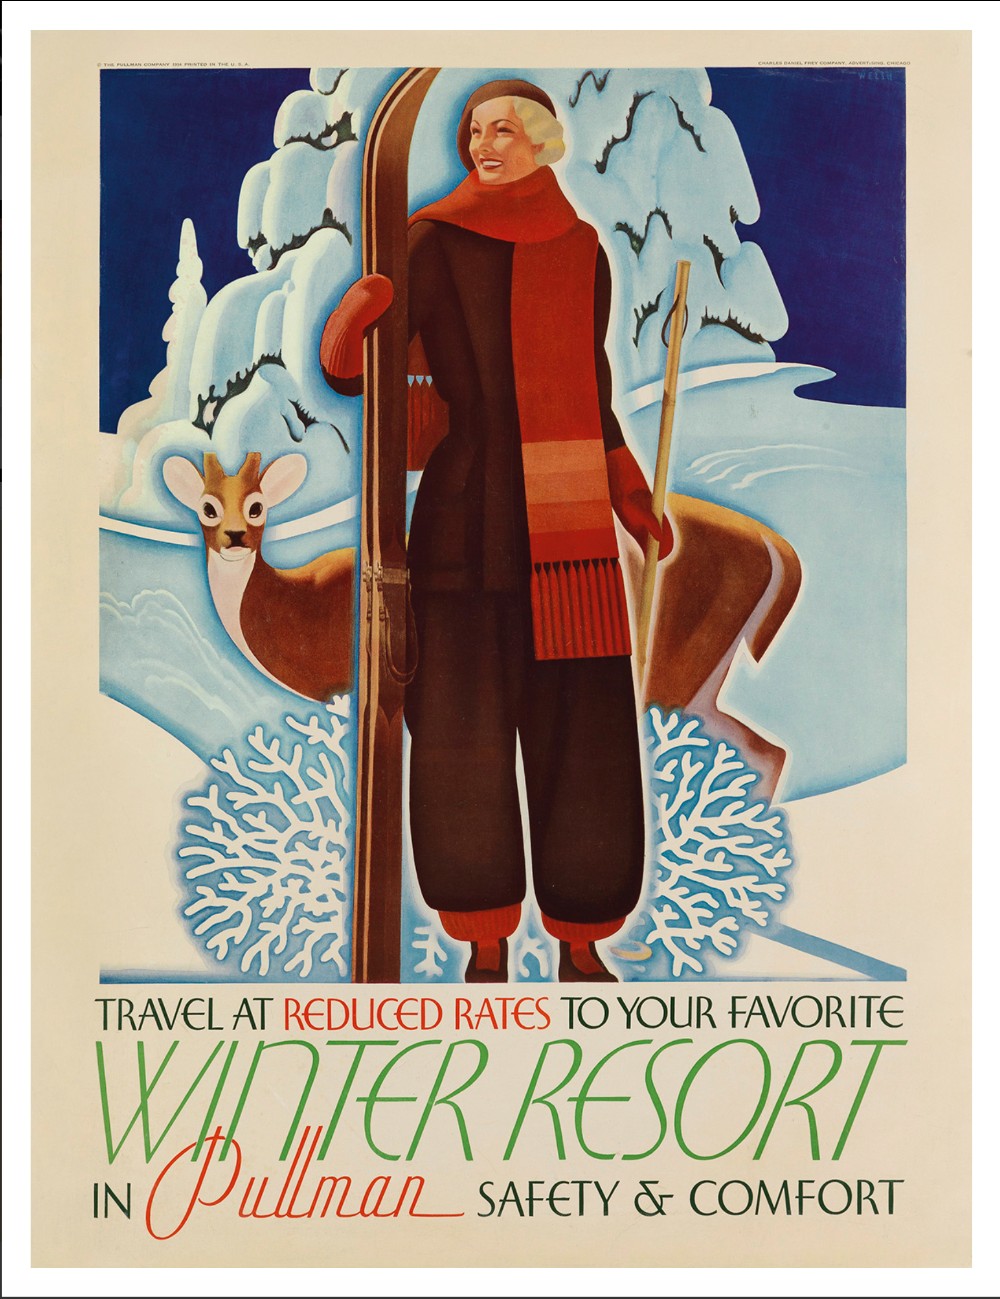 Travel At Reduced Rates To Your Favorite Winter Resort In Pullman. Circa 1935. By William Welsh (1899-1984).